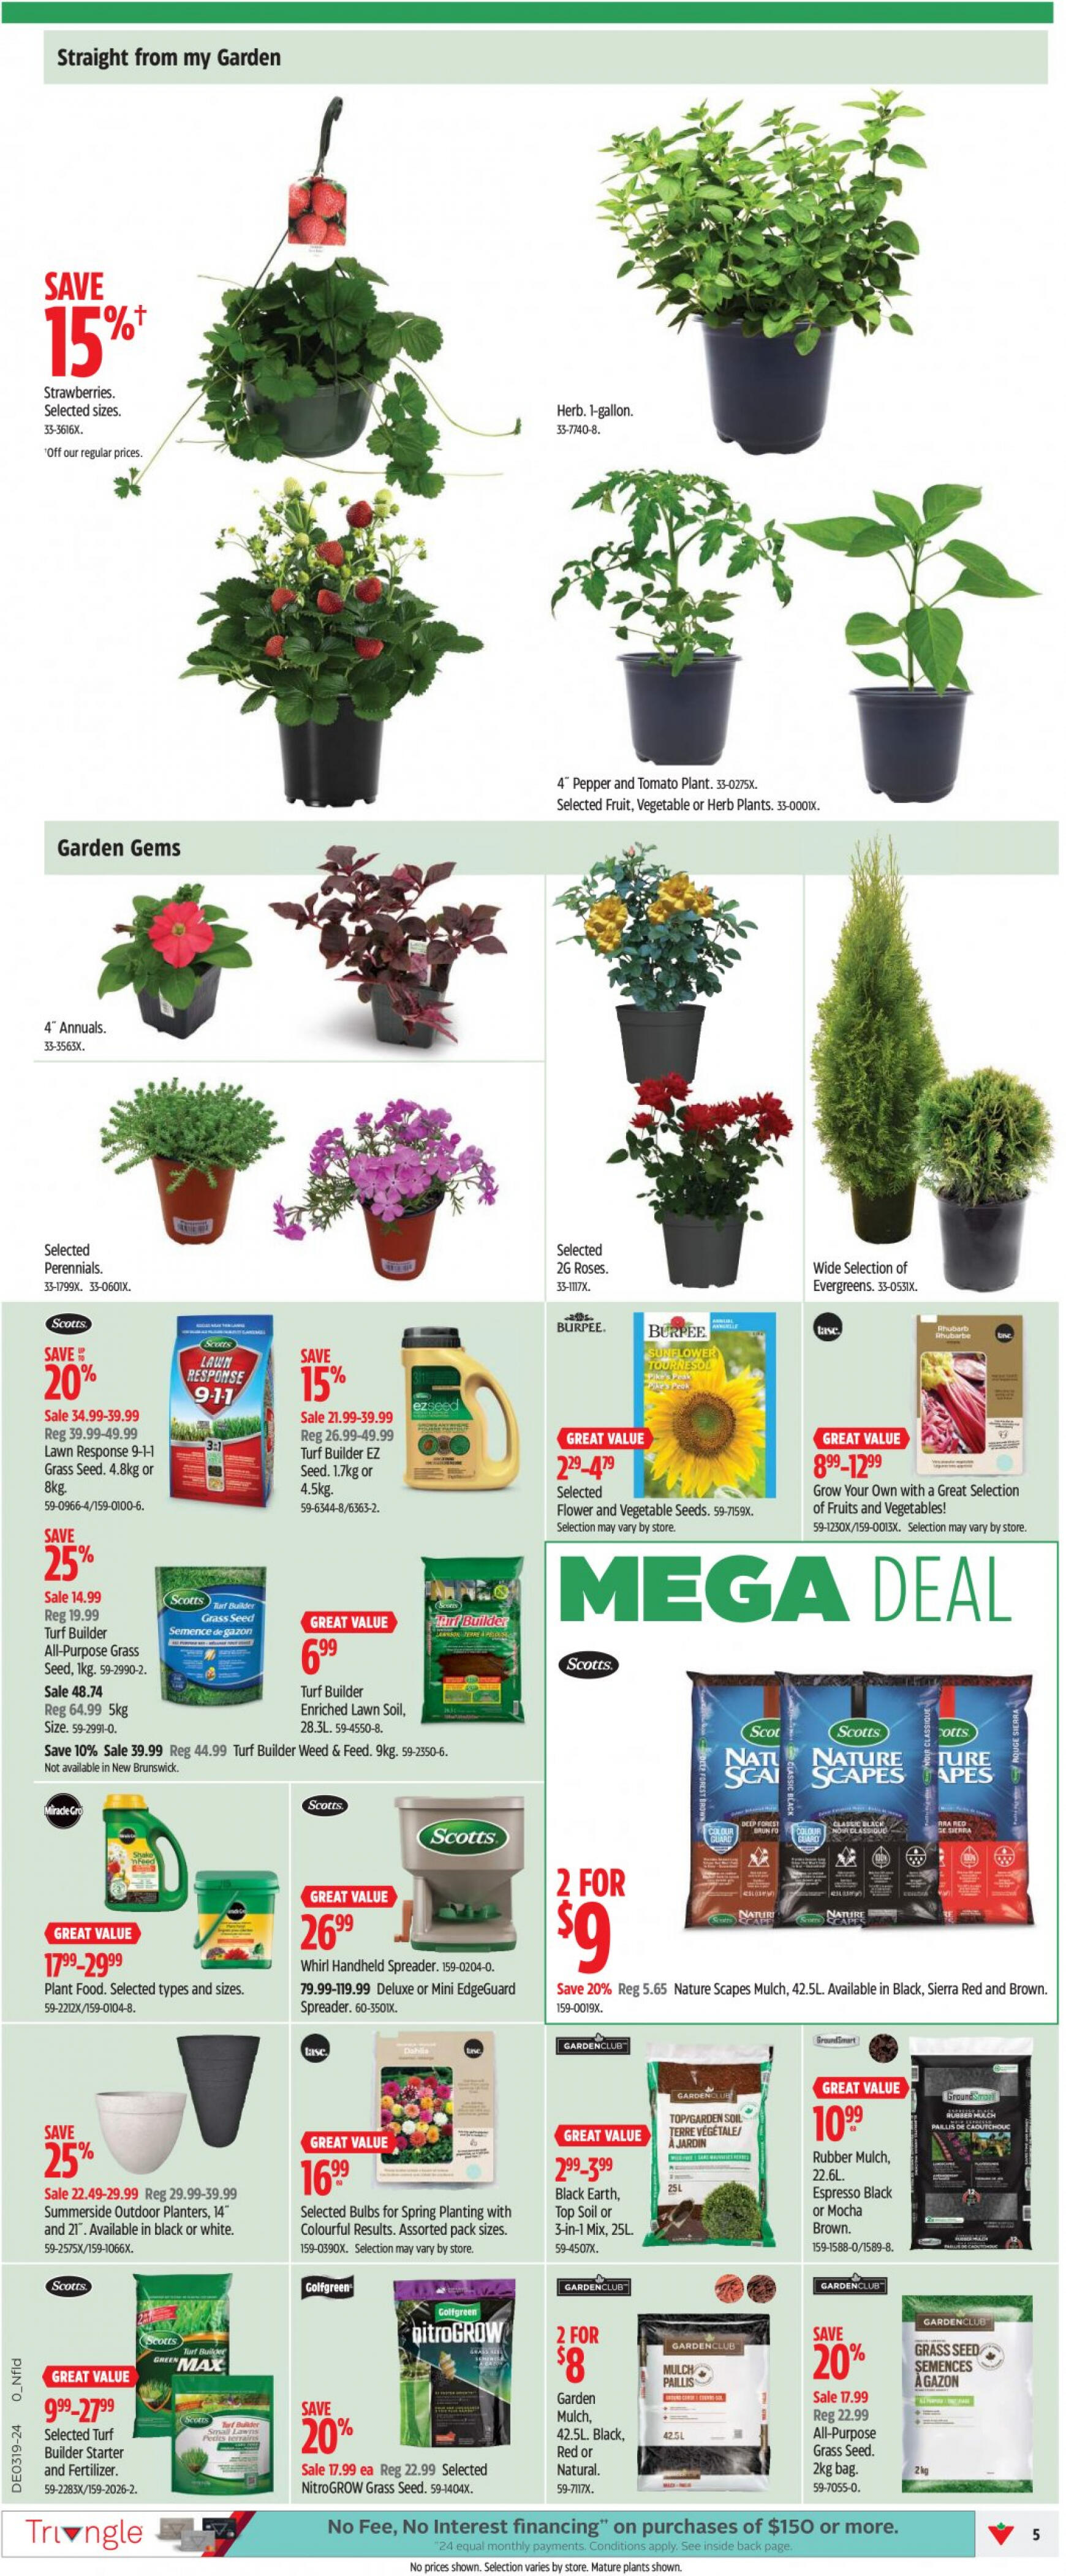 canadian-tire - Canadian Tire flyer current 02.05. - 08.05. - page: 5